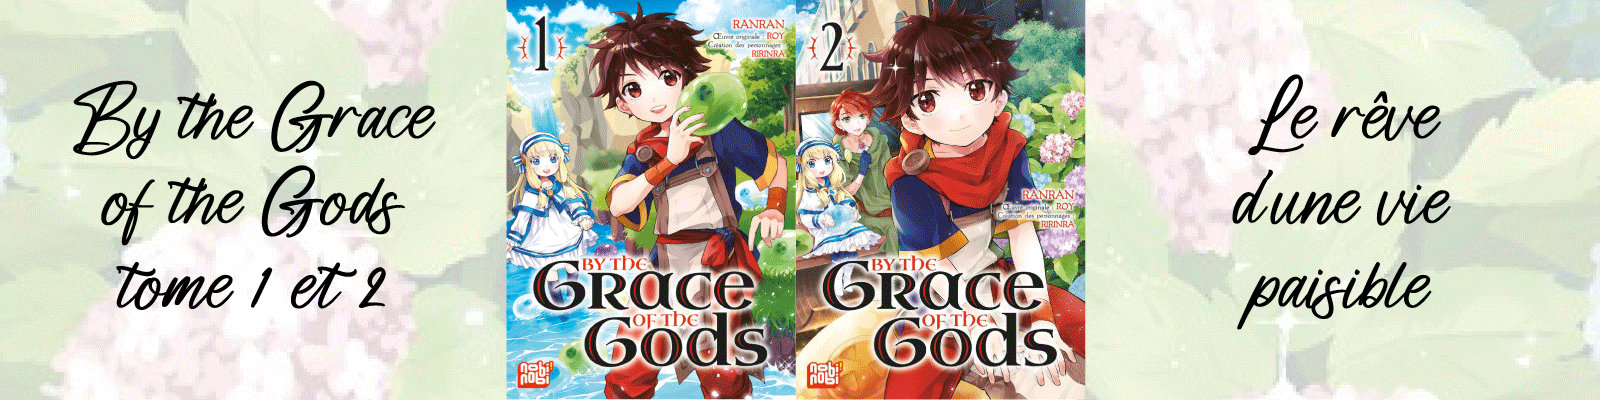 By the grace of the gods-T1-1-2